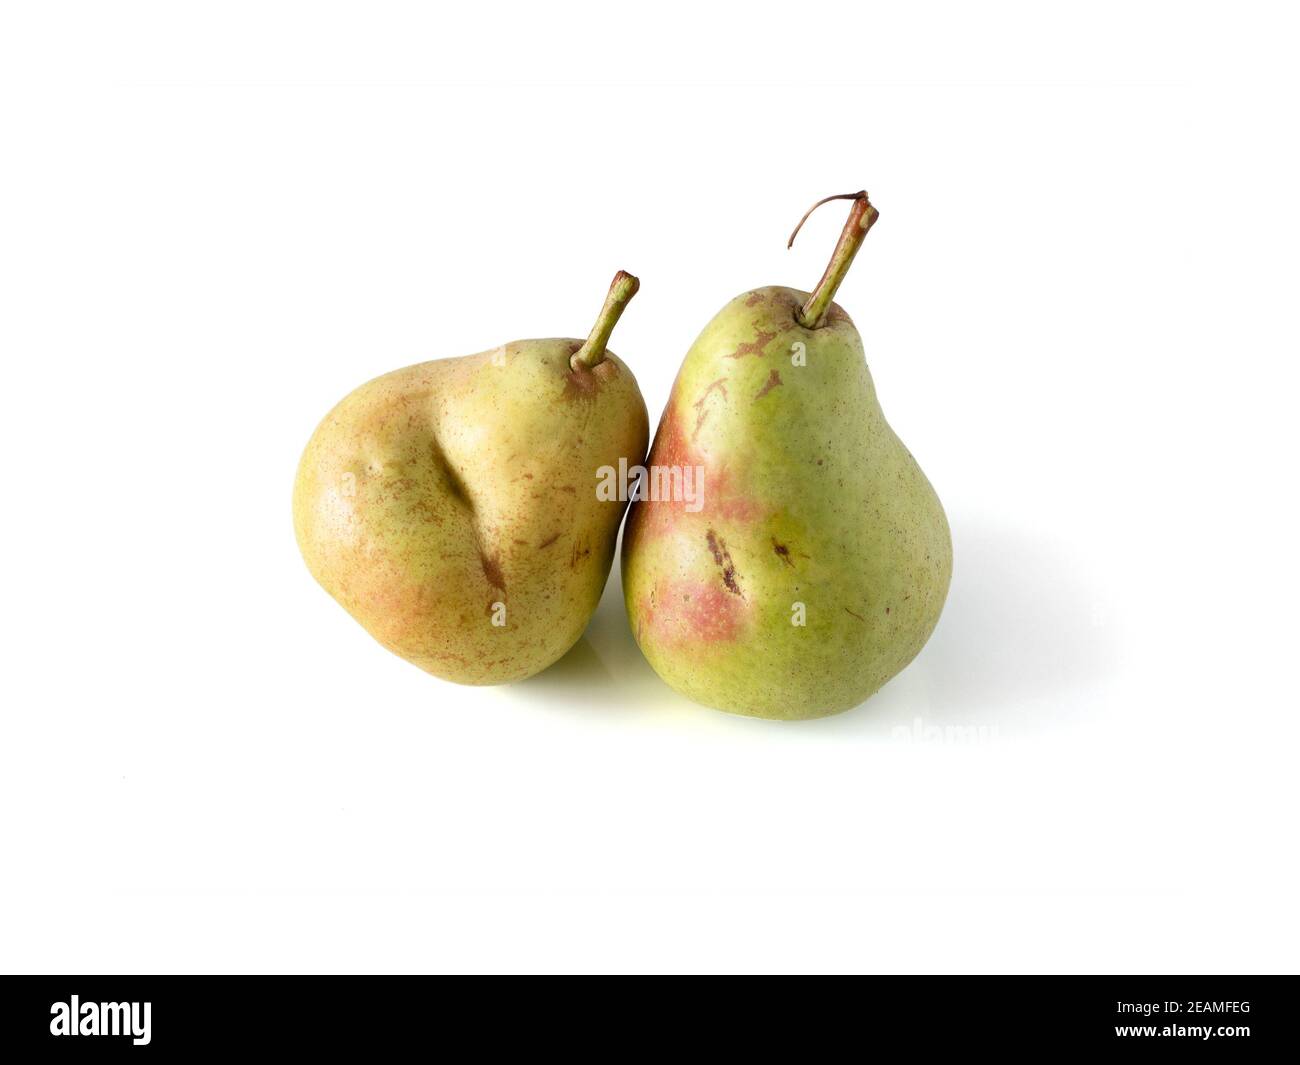 Perfect 'Pear'ings: The Secrets To Choosing the Right Pear for